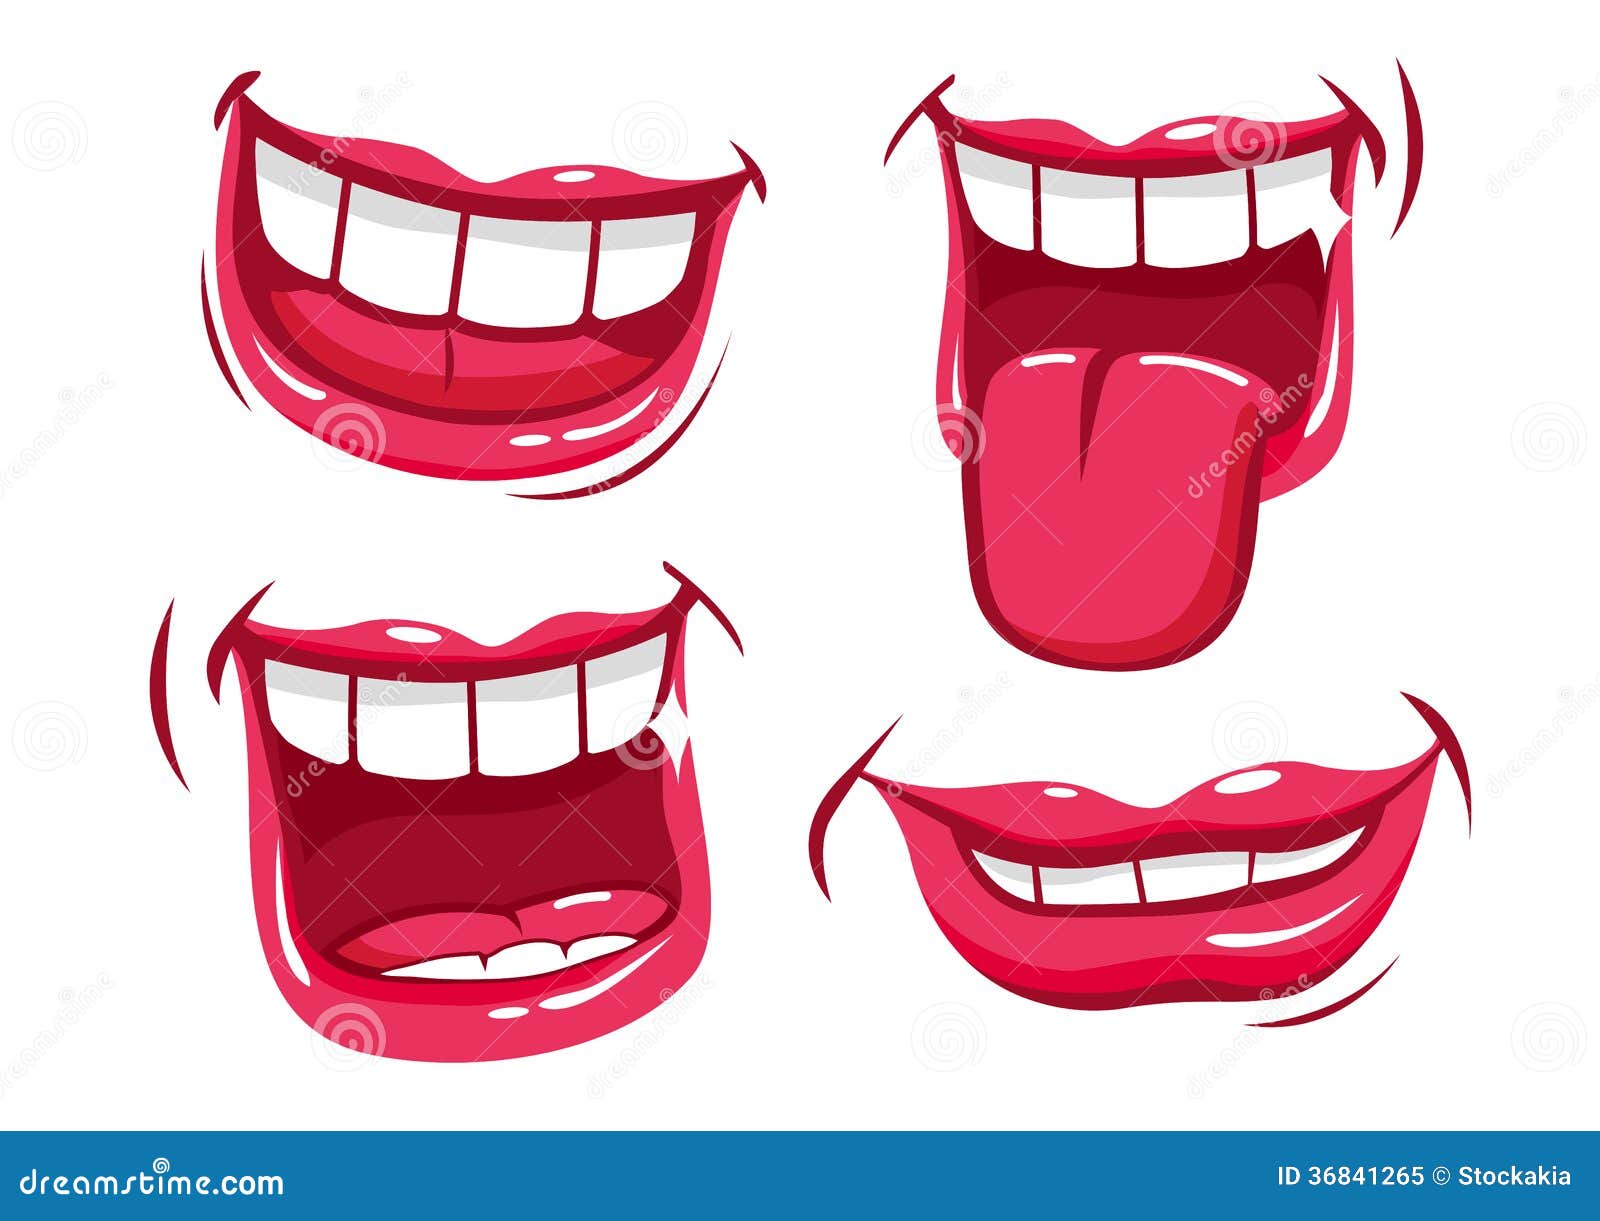 funny mouths clipart - photo #9